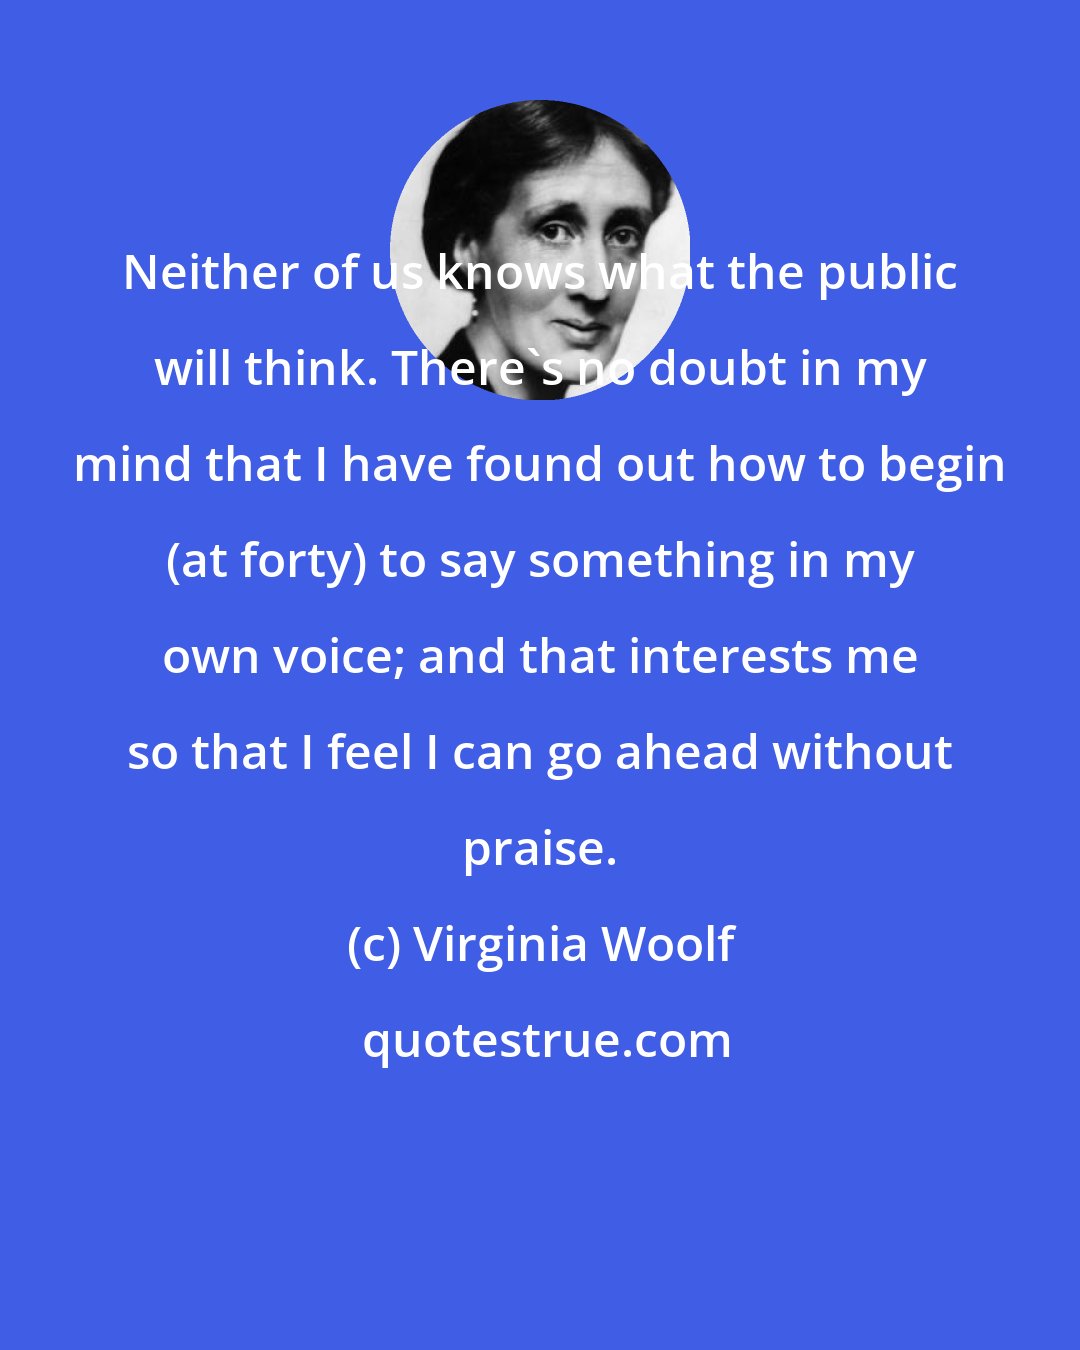 Virginia Woolf: Neither of us knows what the public will think. There's no doubt in my mind that I have found out how to begin (at forty) to say something in my own voice; and that interests me so that I feel I can go ahead without praise.